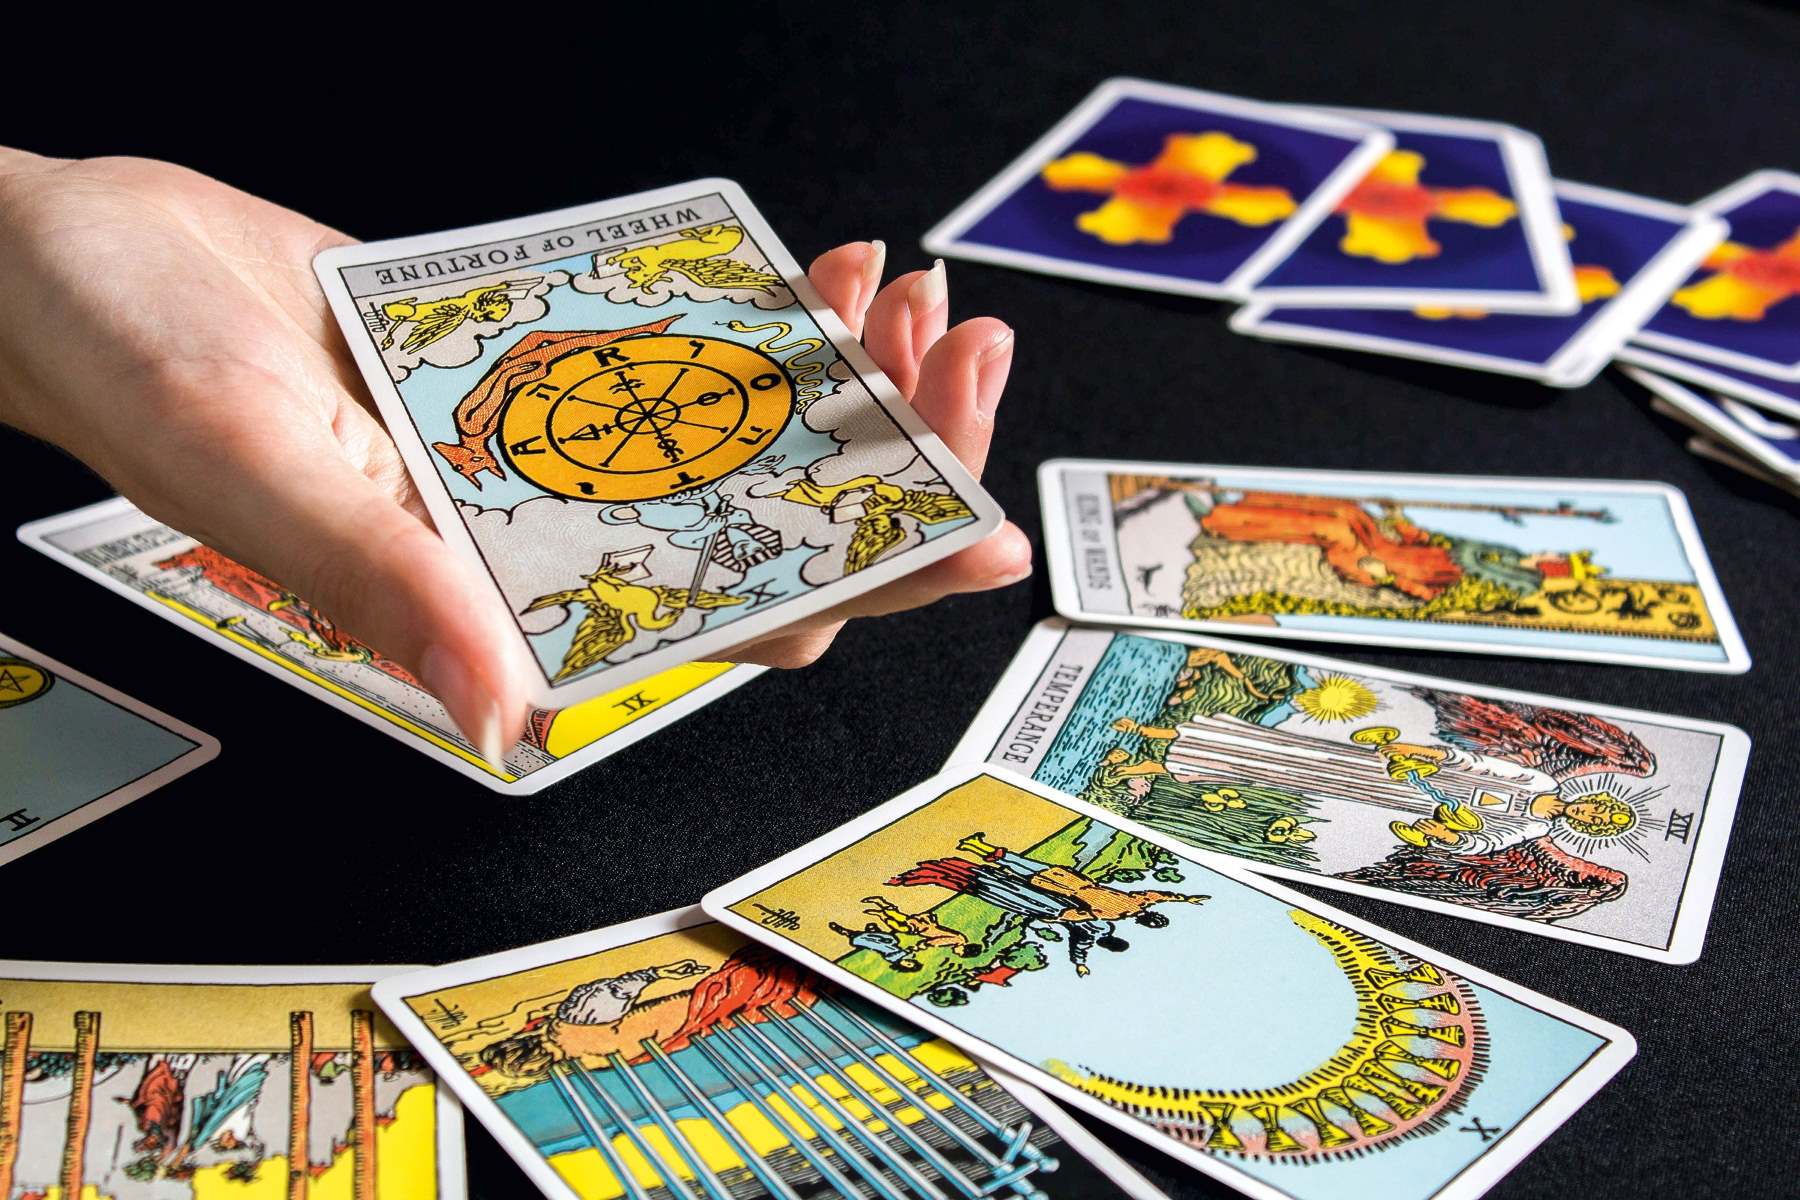 5 Things You Should Never Do With Tarot Cards